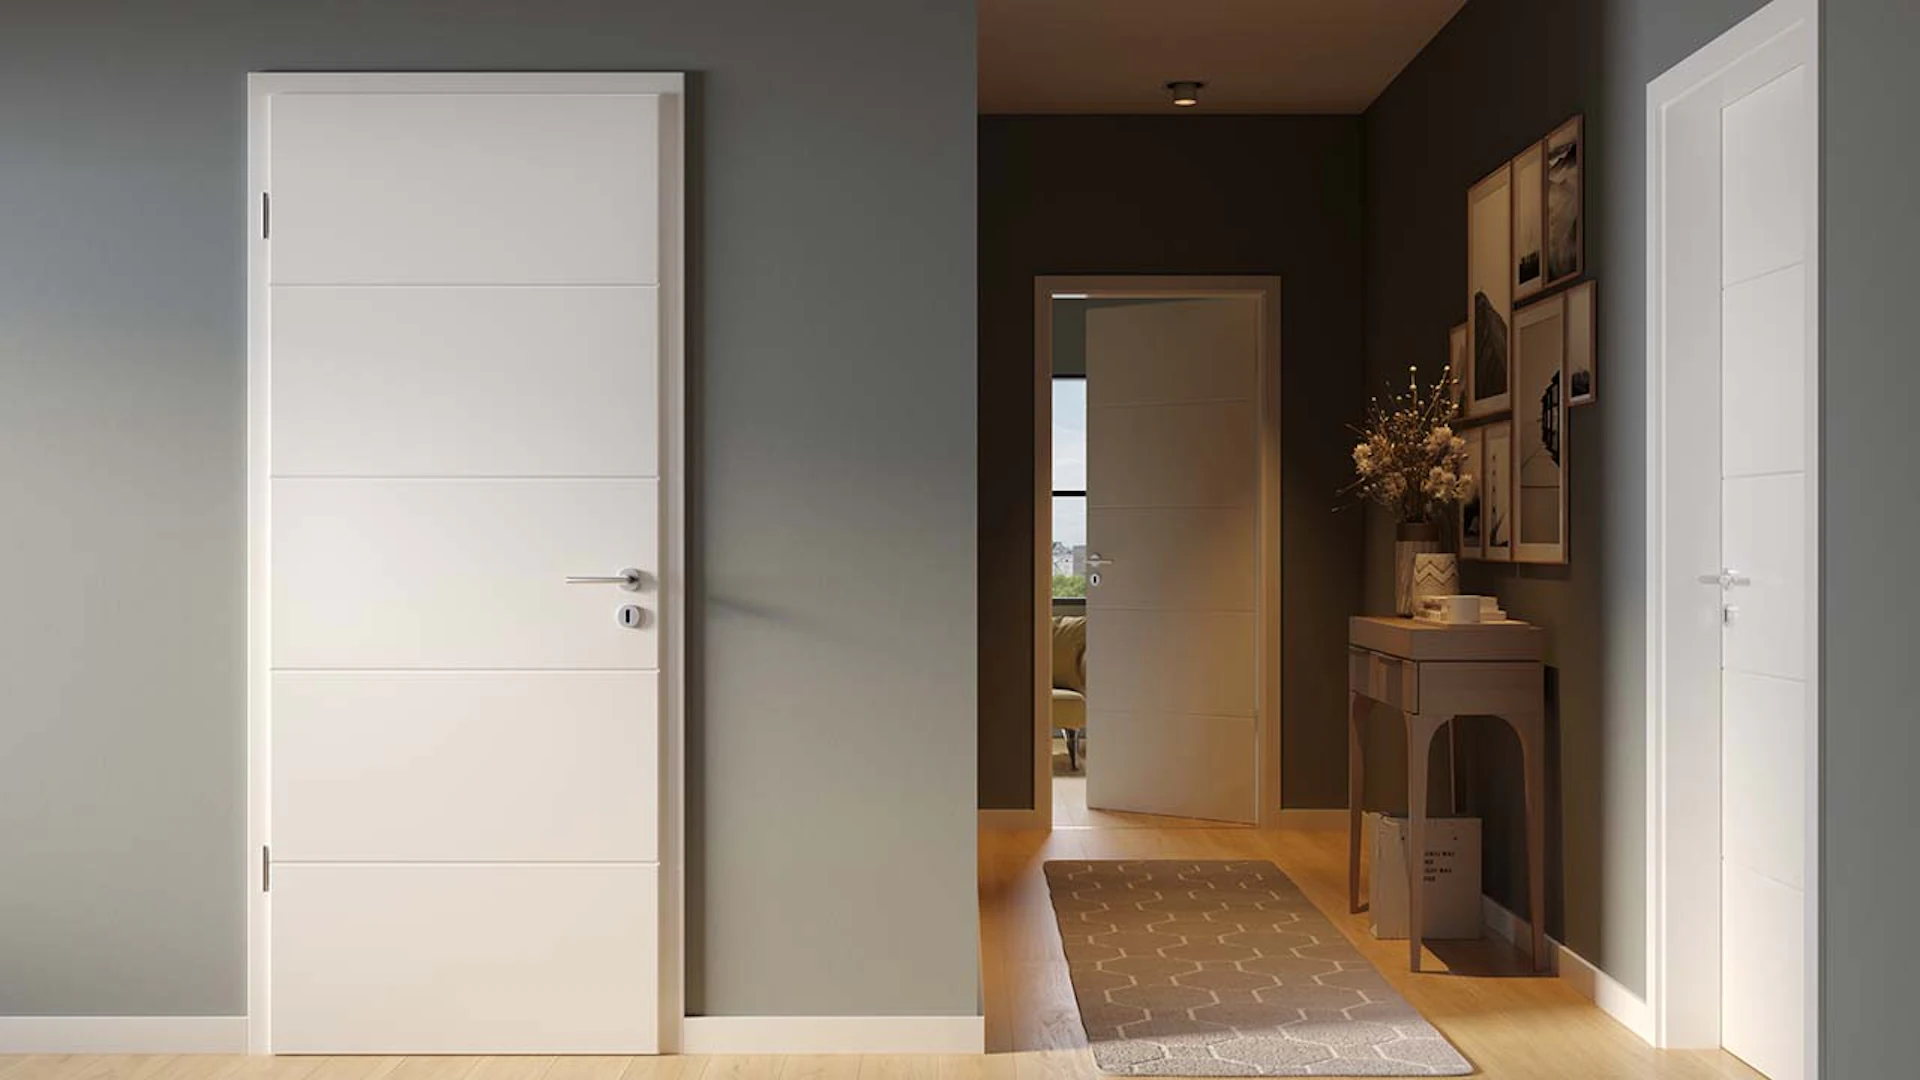 planeo interior door lacquer 2.0 - Kinga 9010 white lacquer 2110 x 610 mm DIN R - round RSP hinge 3-t